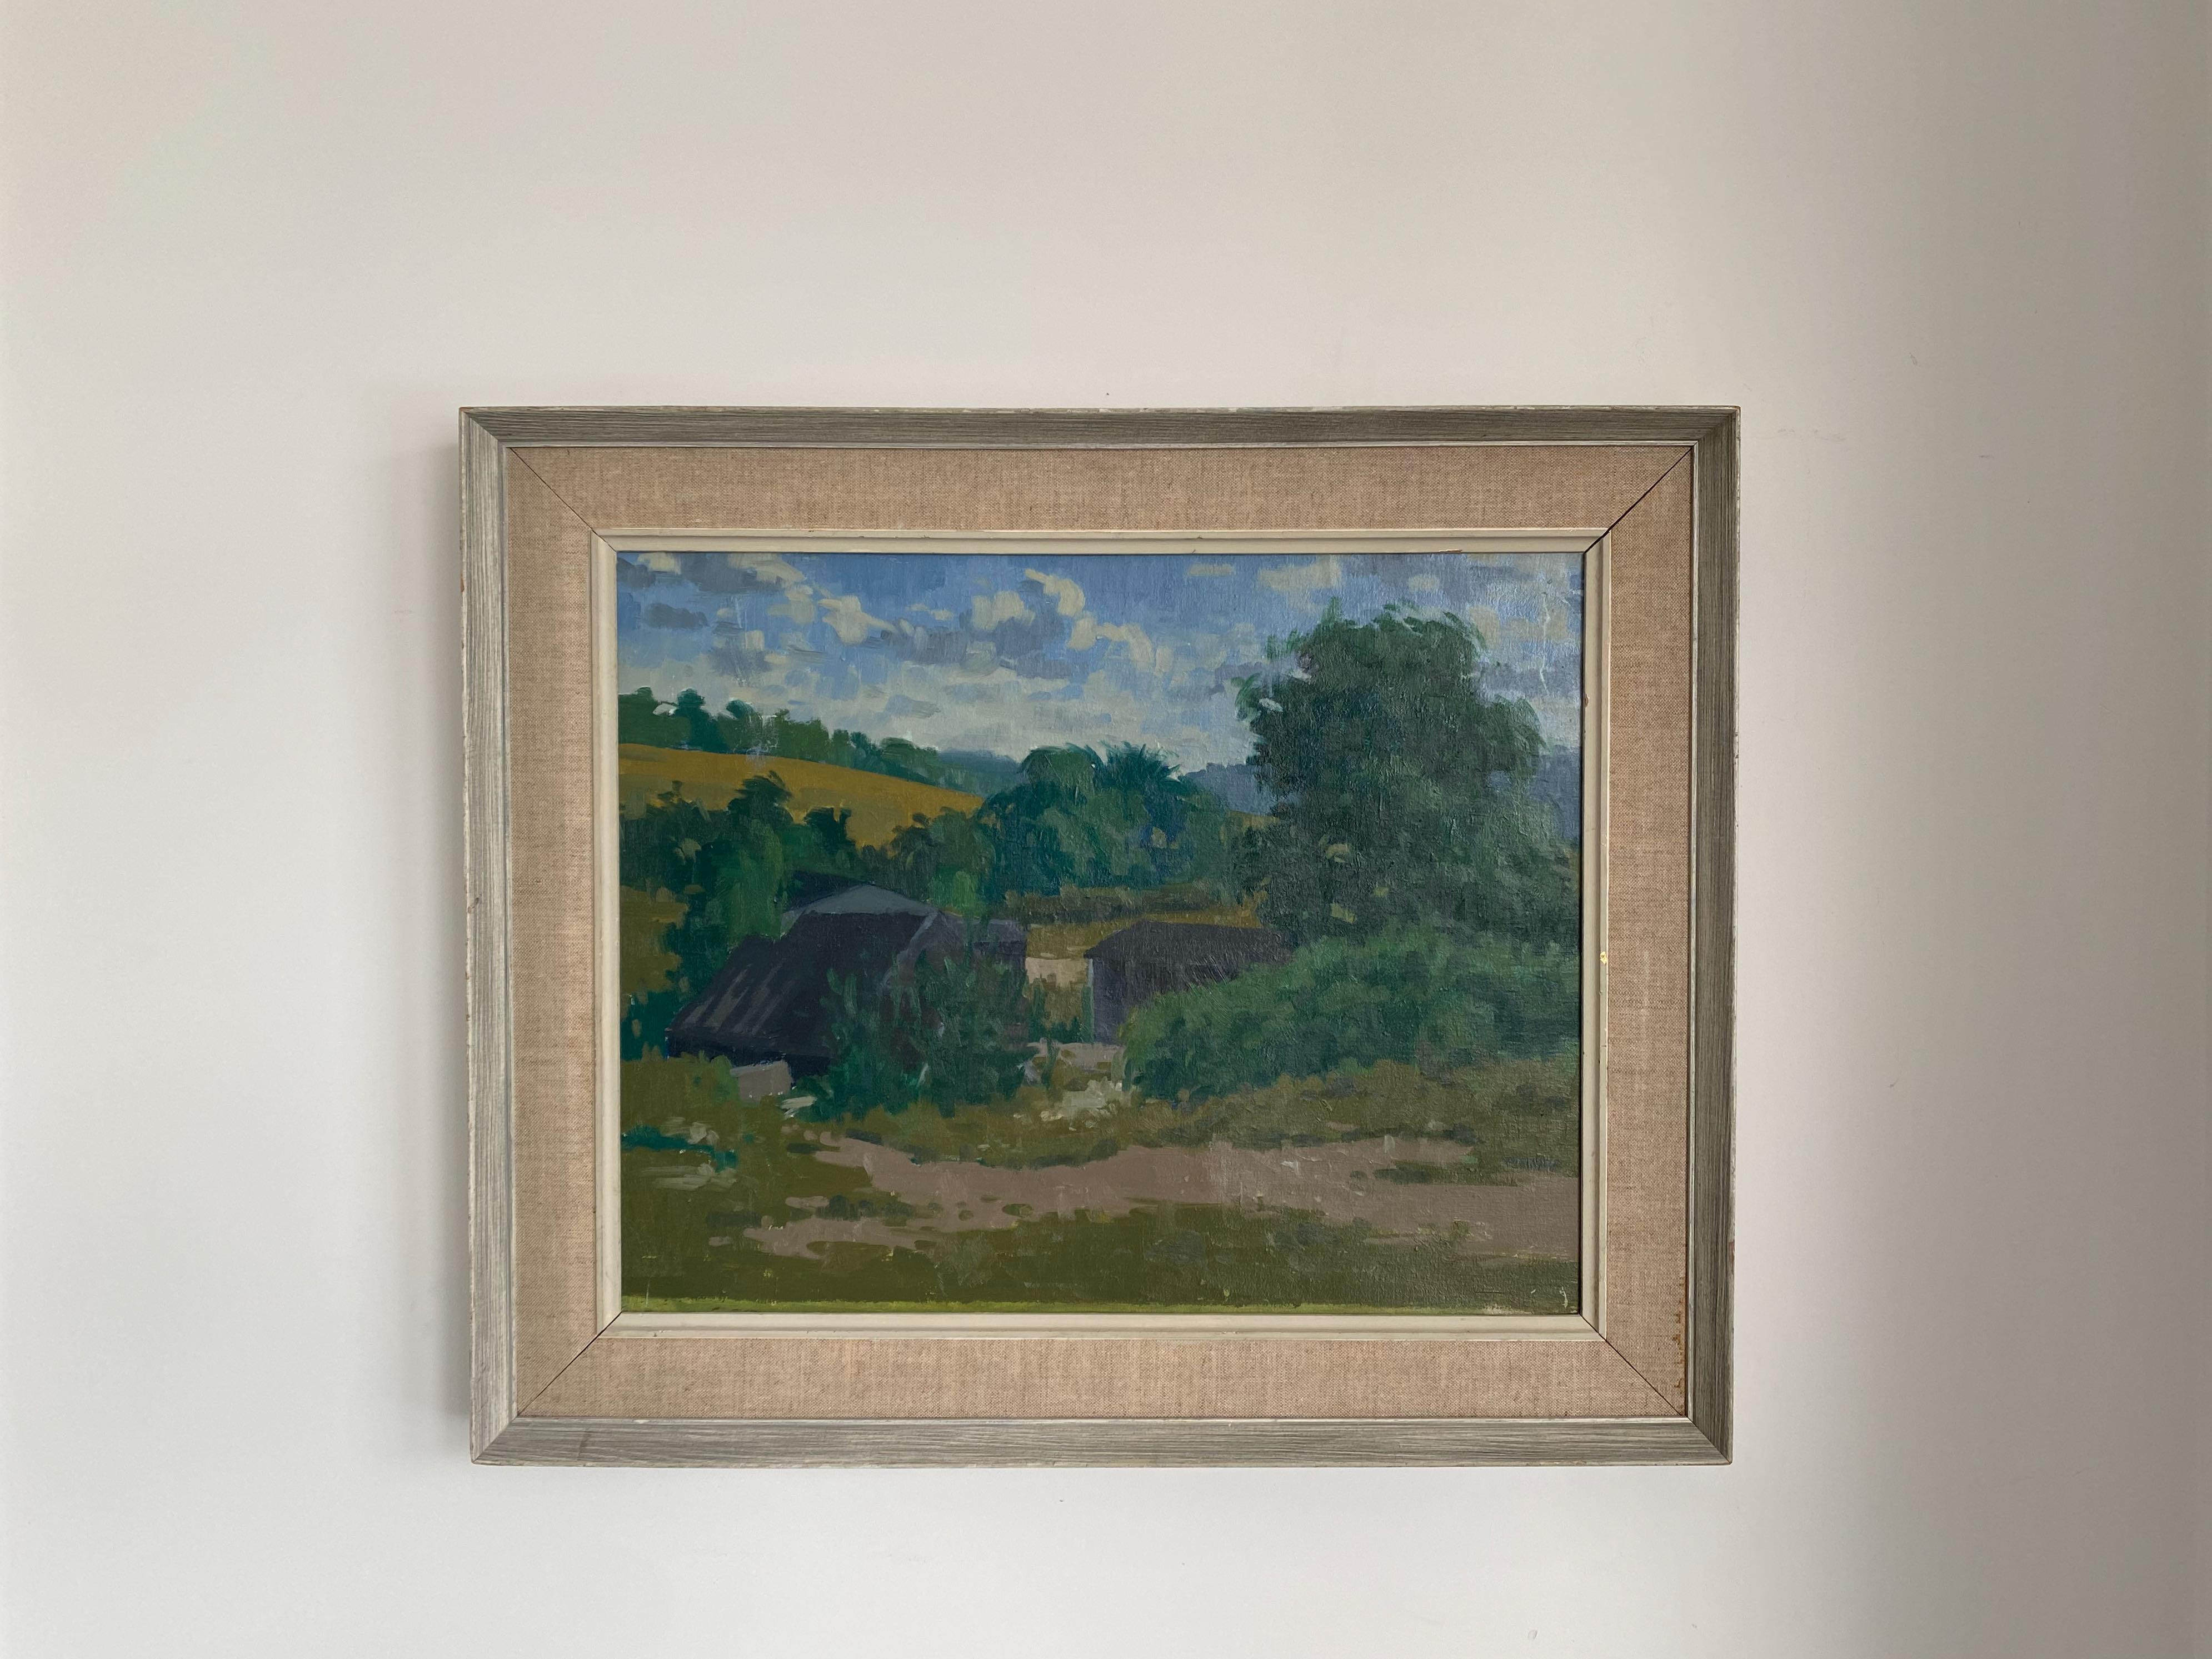 Oil painting

By Victor Tempest

On canvas

Framed

Mid/late 20th century.